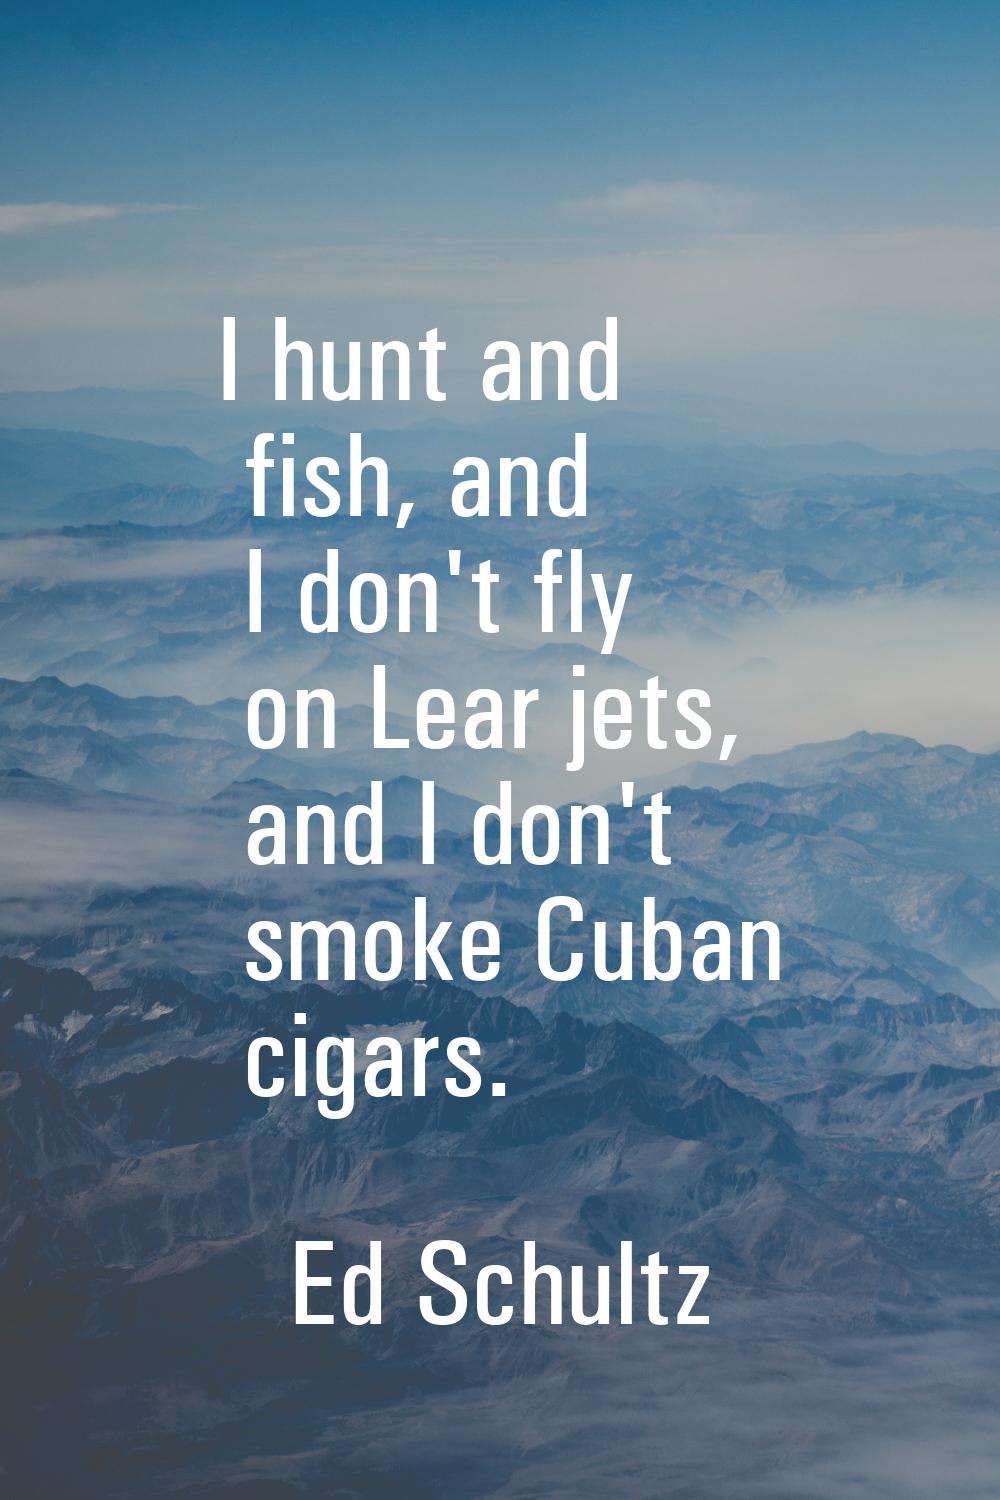 I hunt and fish, and I don't fly on Lear jets, and I don't smoke Cuban cigars.